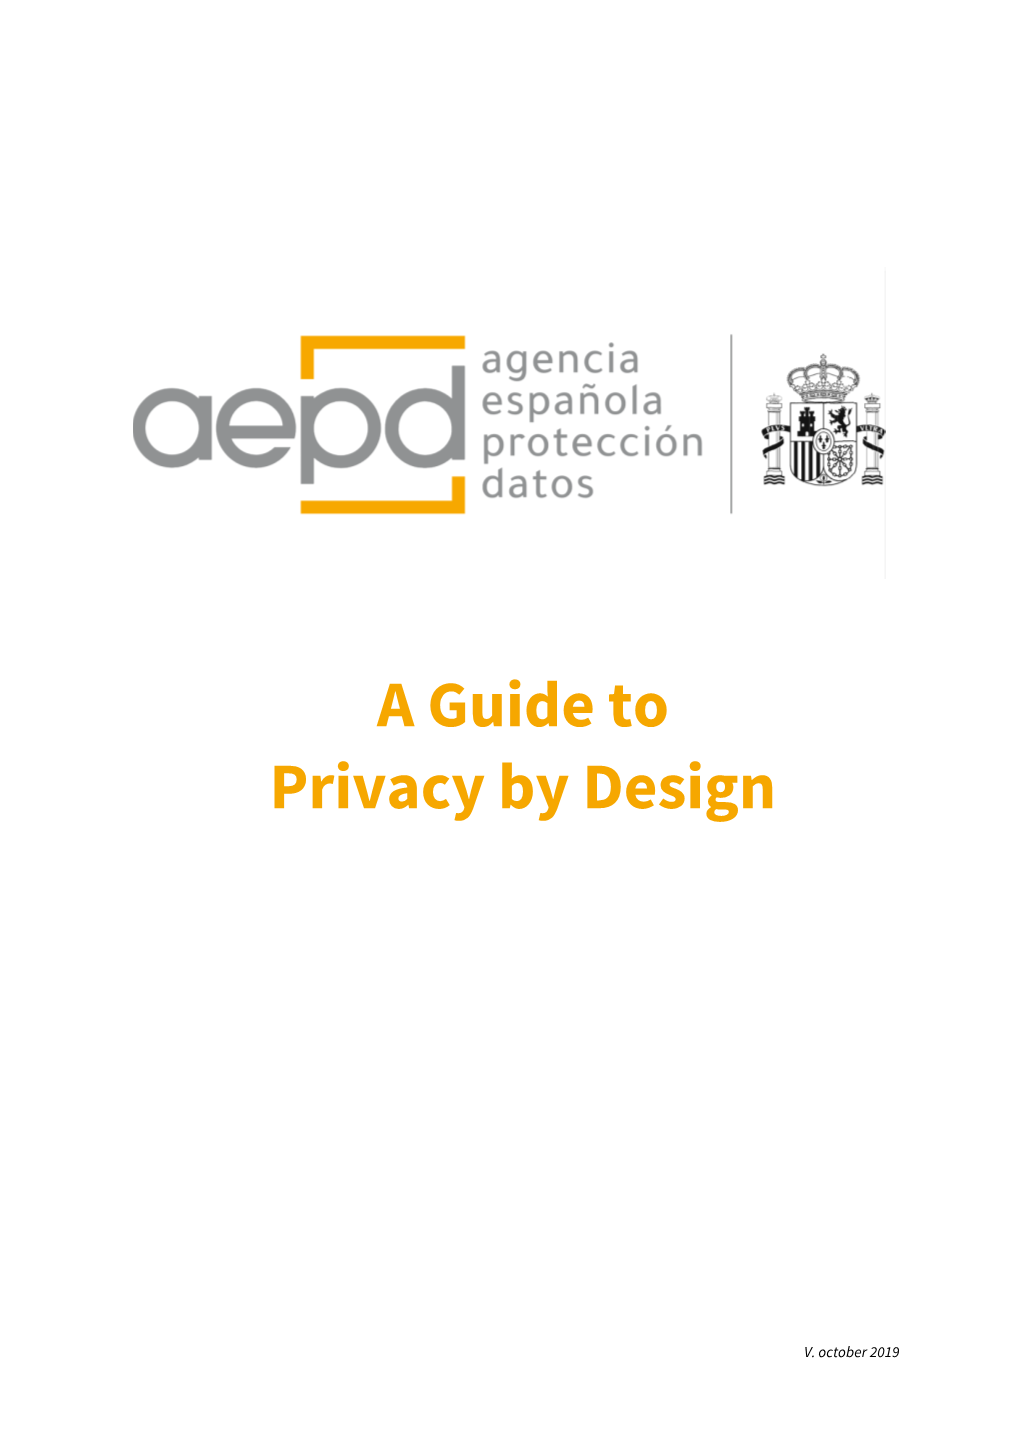 A Guide to Privacy by Design